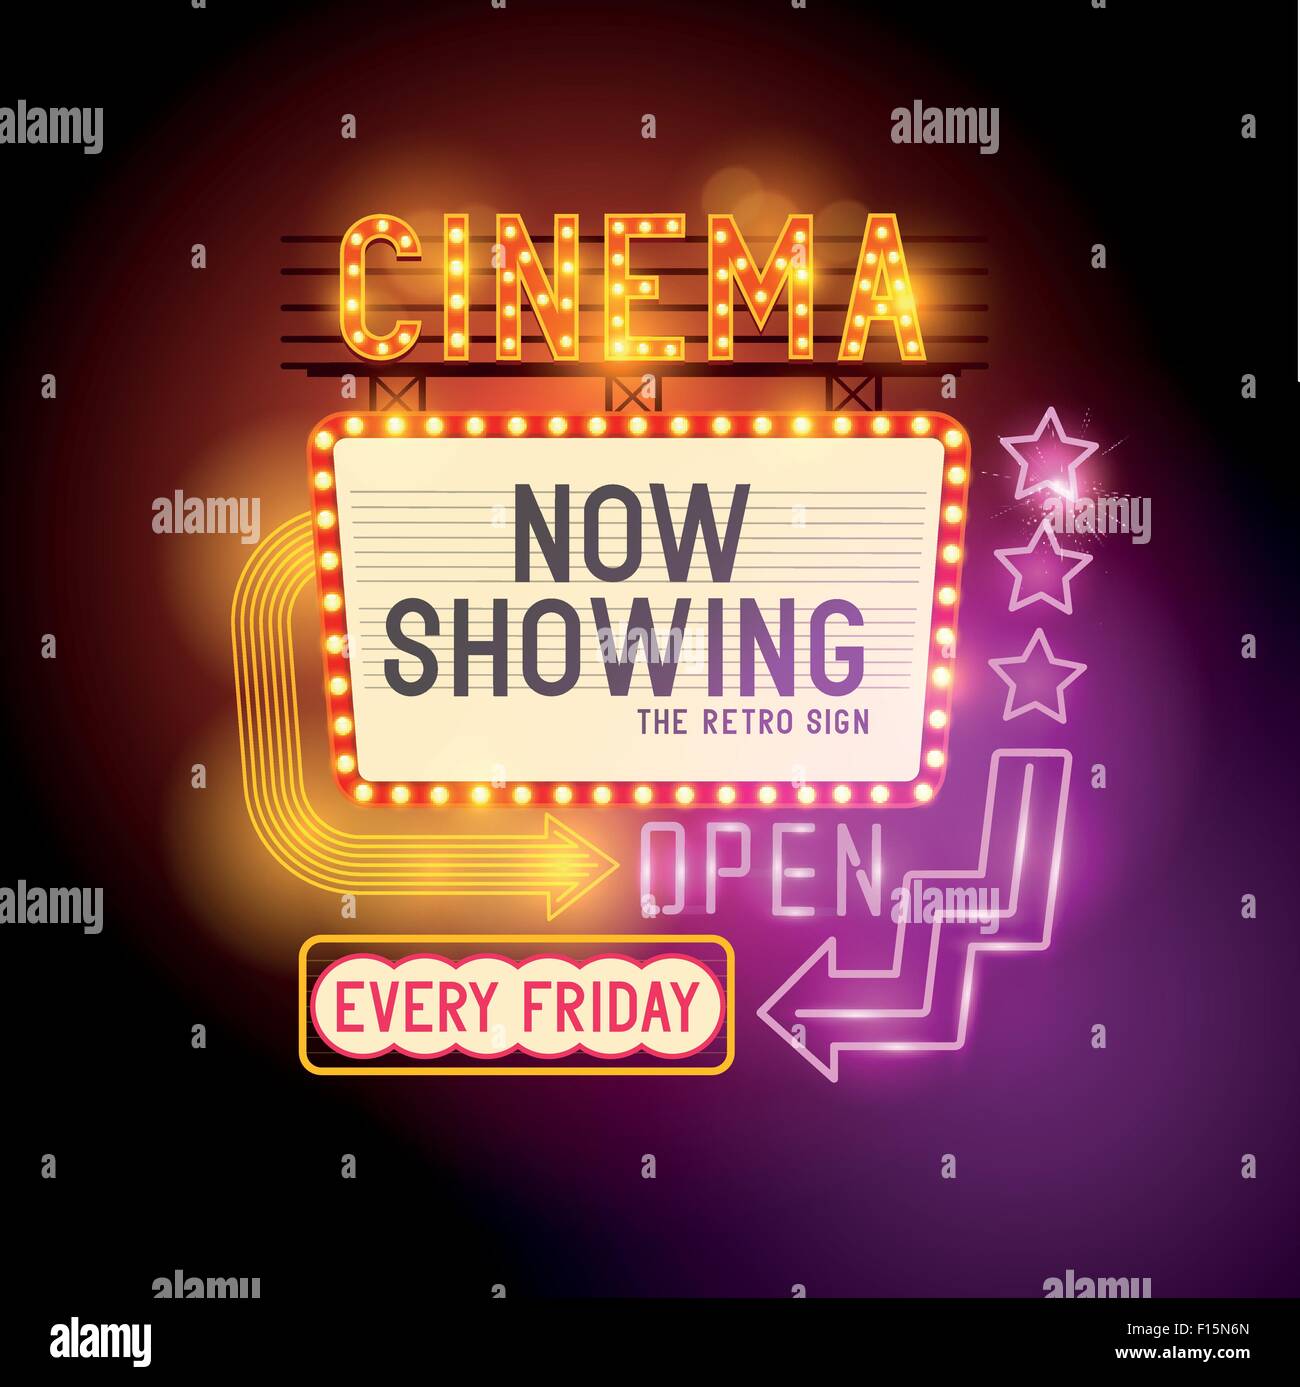 Retro Showtime Sign. Theatre cinema retro sign with glowing neon signs. Vector illustration. Stock Vector